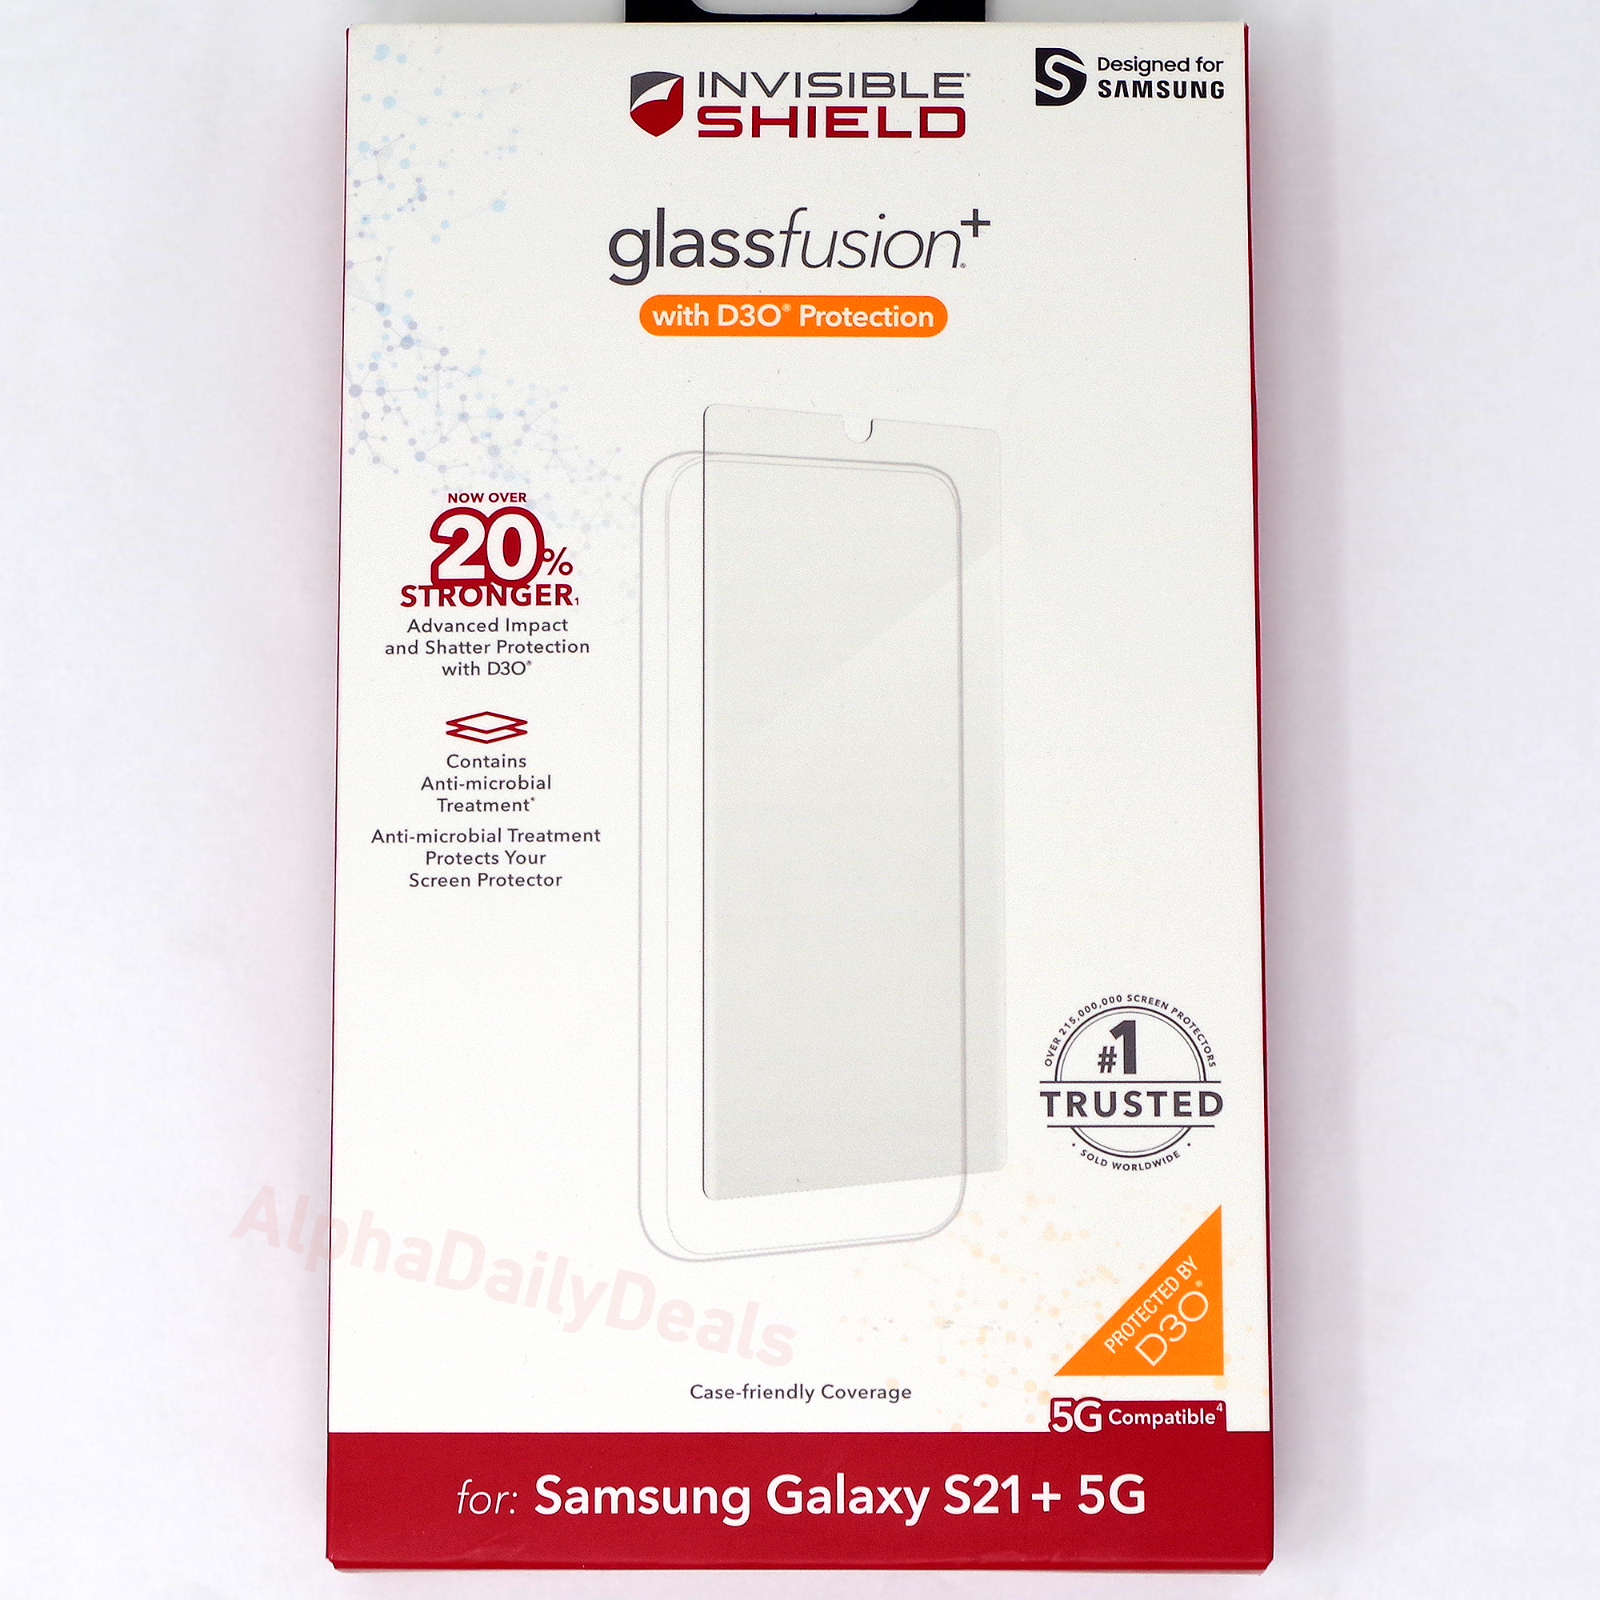 ZAGG Glass Fusion+ with D3O Screen Protector for Samsung Galaxy S21+ 5G